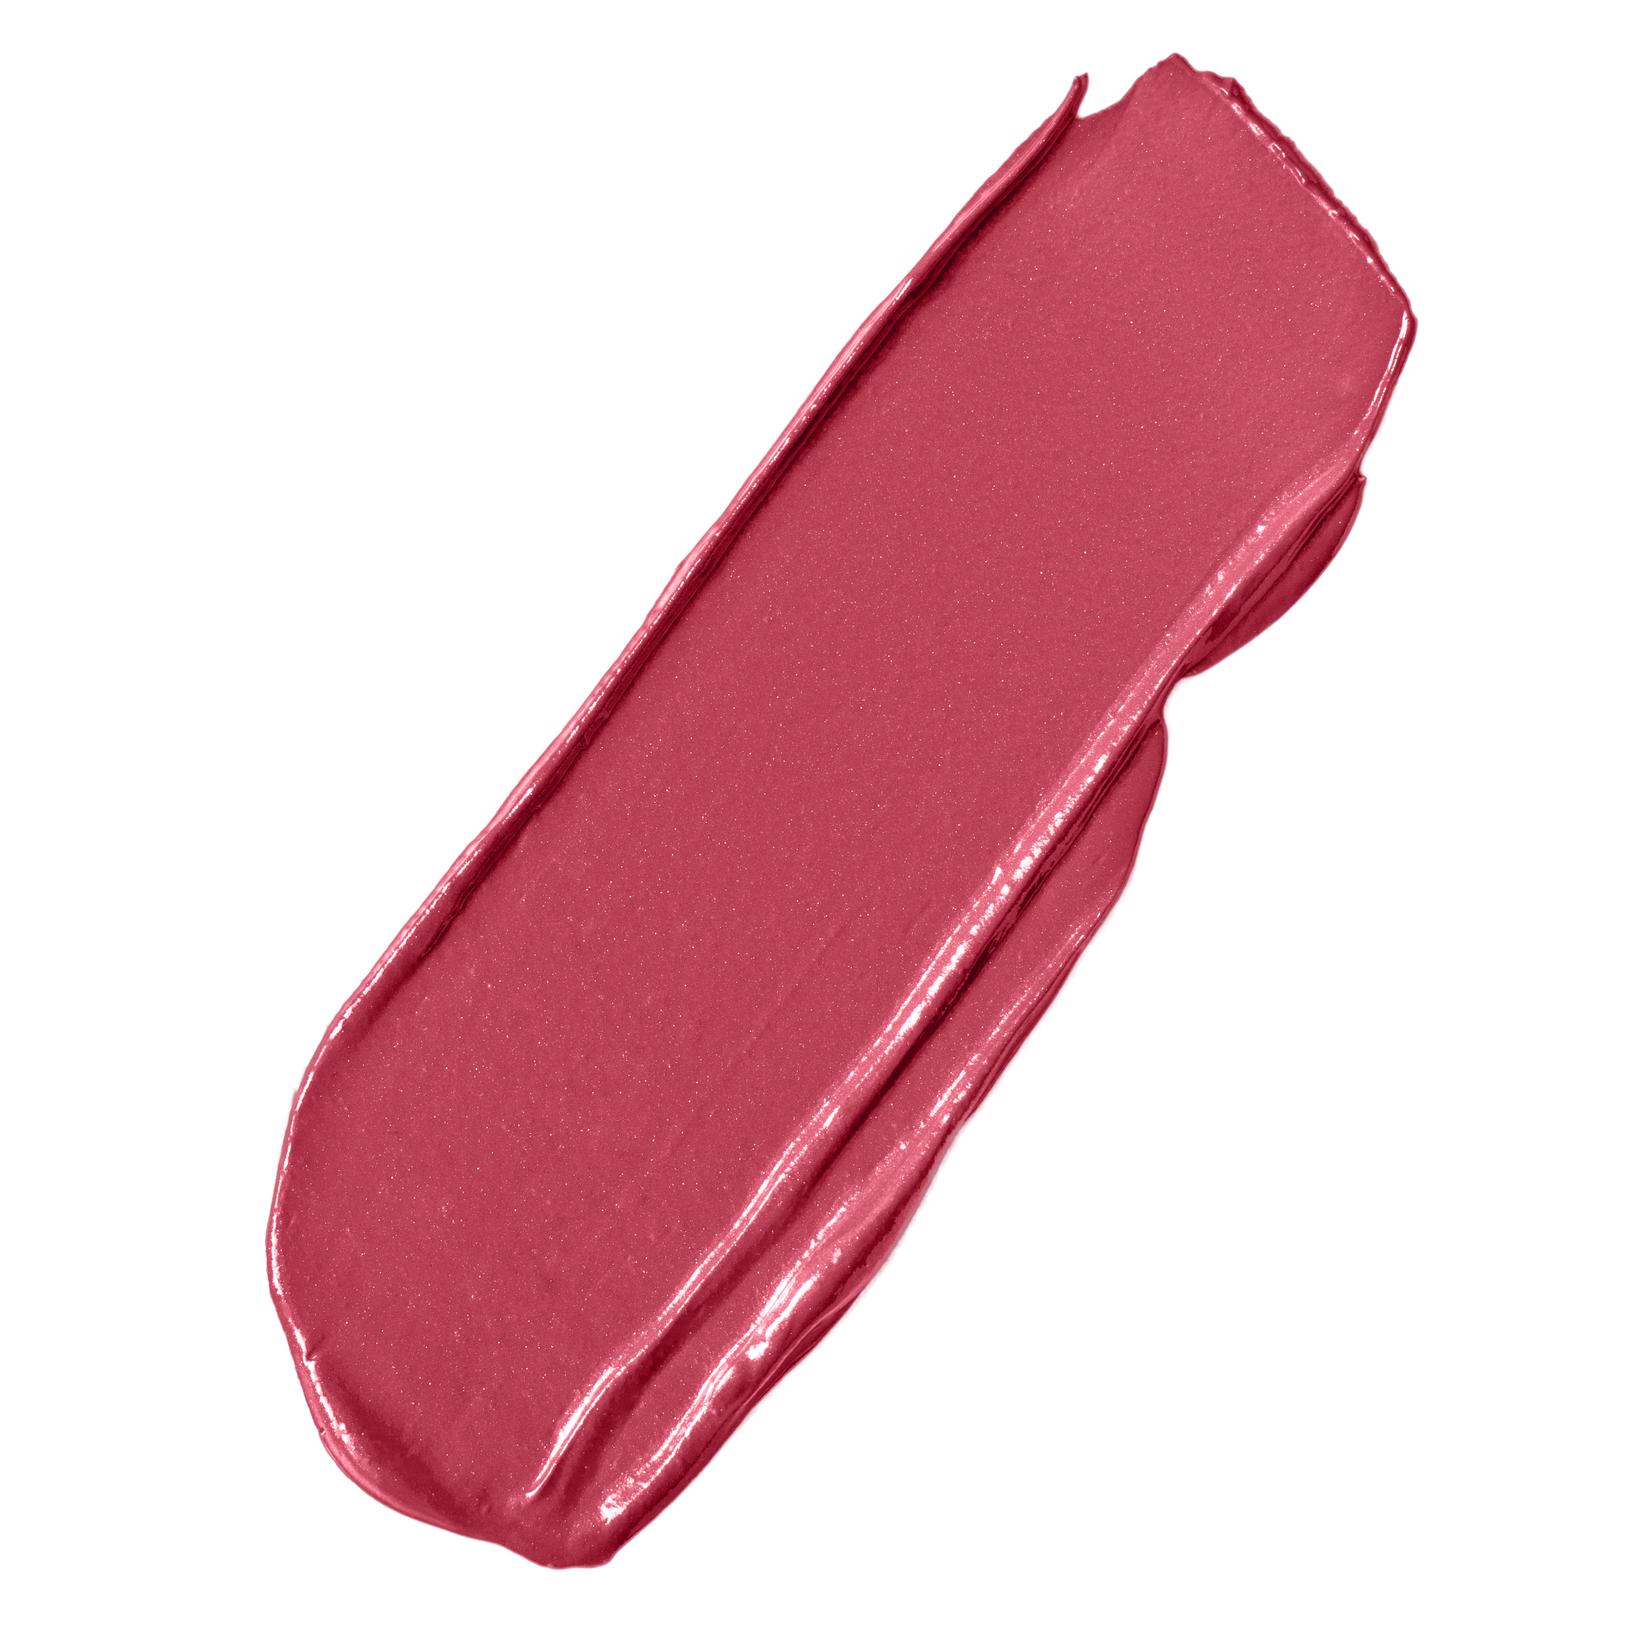 Selected image for wet n wild Cloud Pout marshmallow lip mousse Sjaj za usne, 1111924E Marsh To My Mallow, 3 ml